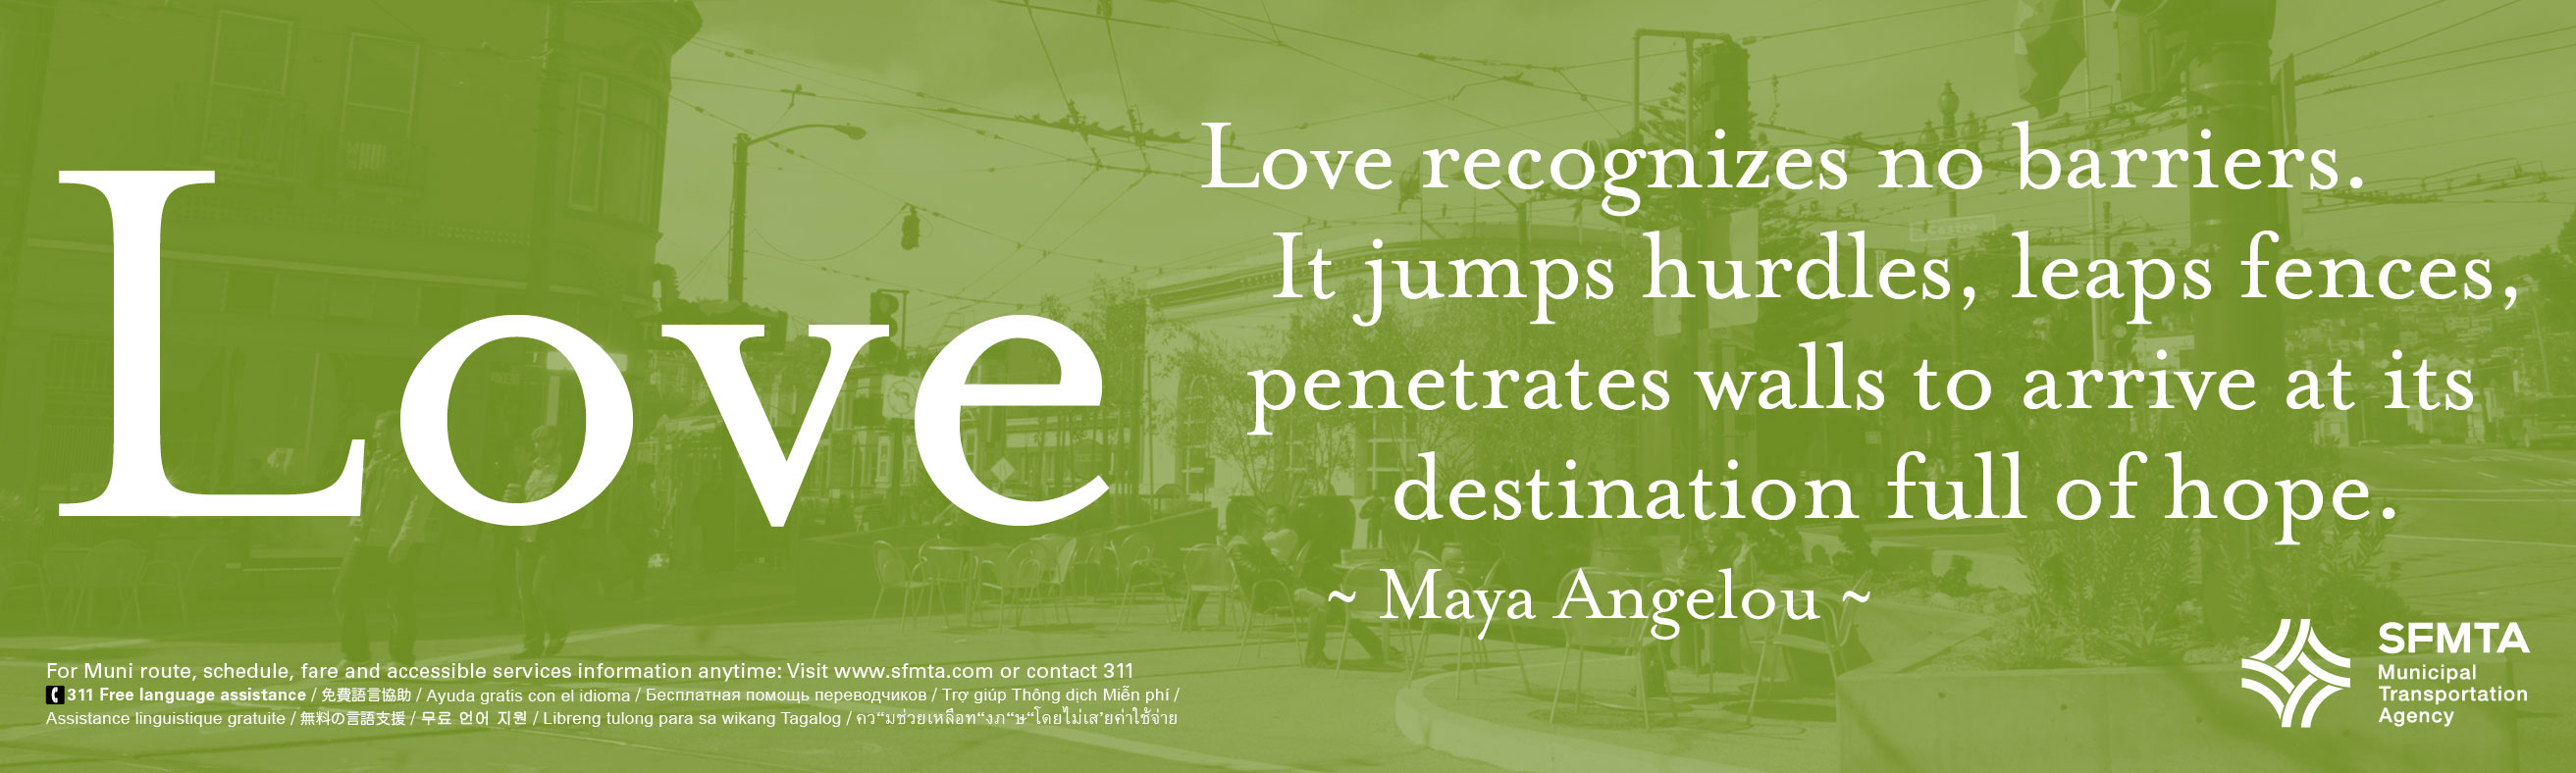 "Love" in large white text on the left. In smaller white text on the right: "Love recognizes no barriers. It jumps hurdles, leaps fences, penetrates walls to arrive at its destination full of hope. - Maya Angelou" on a grass green-tinted photo of Market and Castro streets